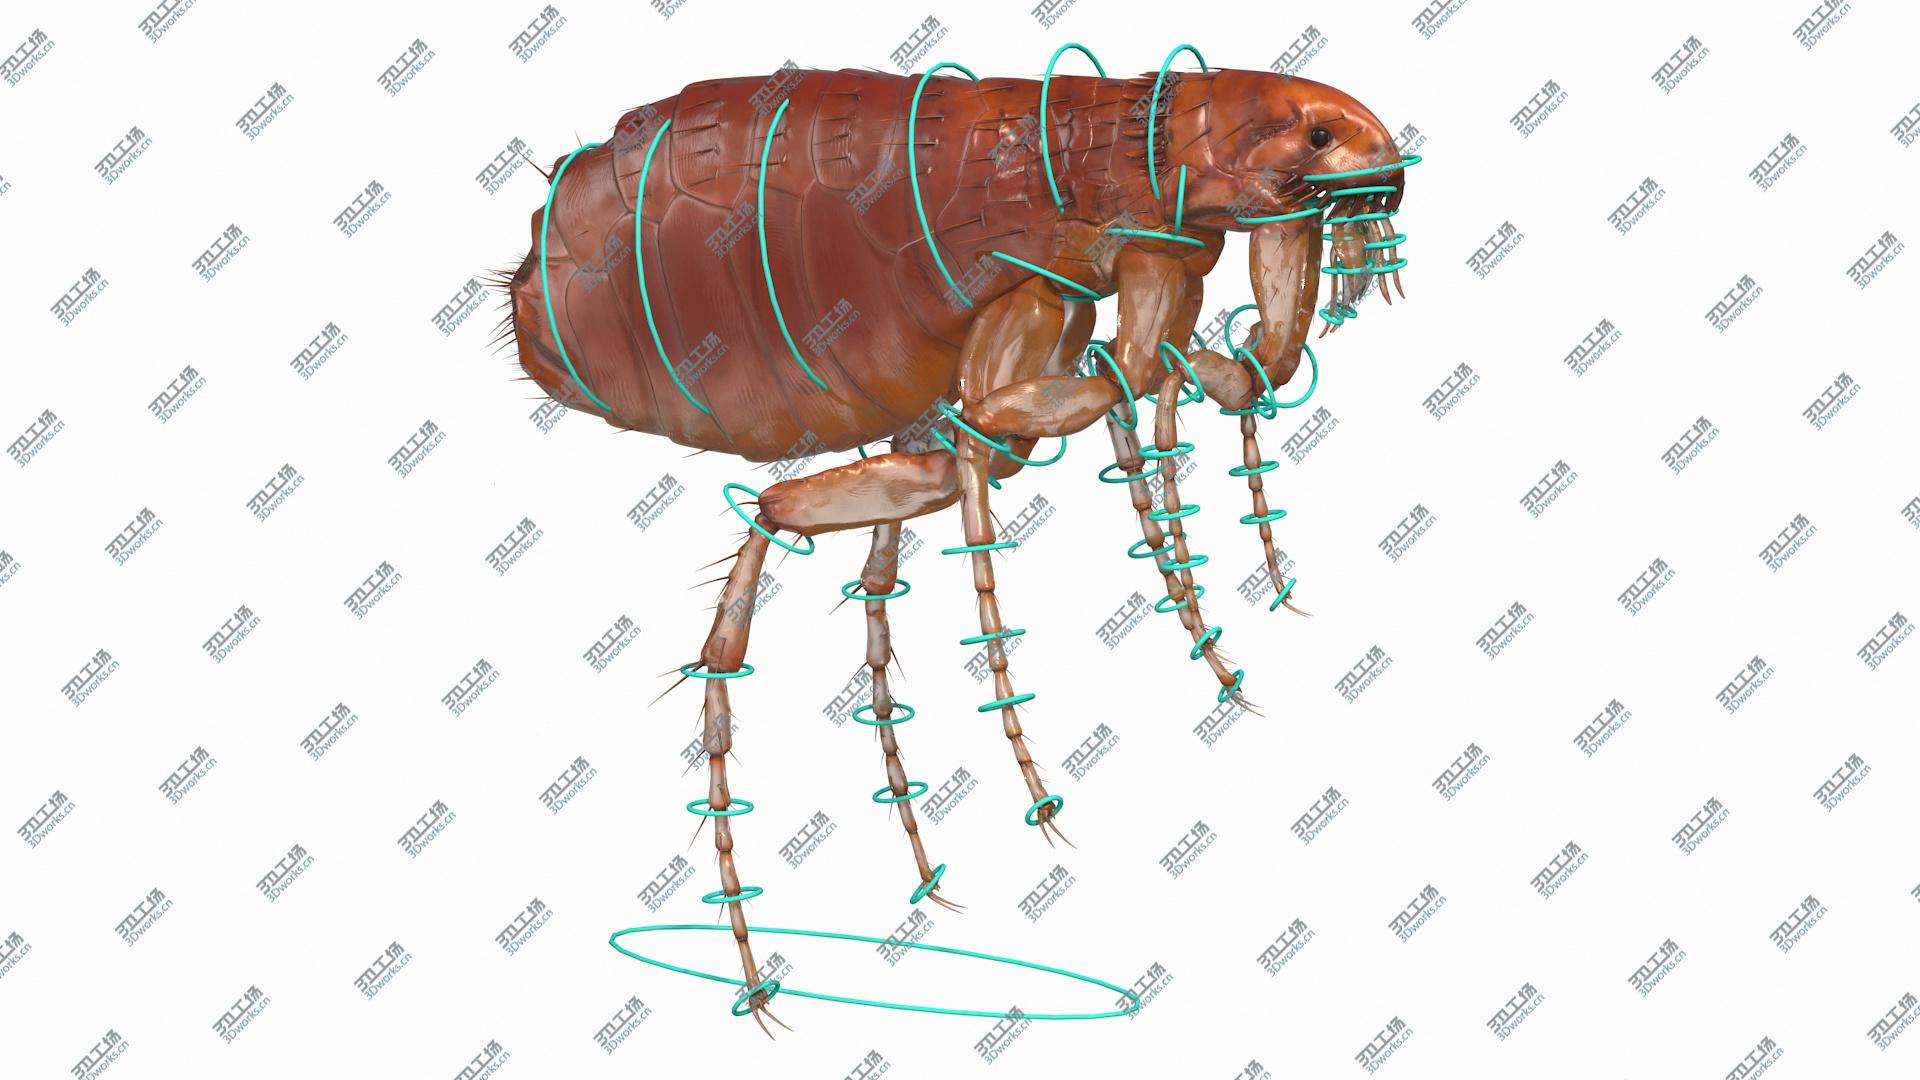 images/goods_img/202104093/3D Flea Insect Rigged model/3.jpg